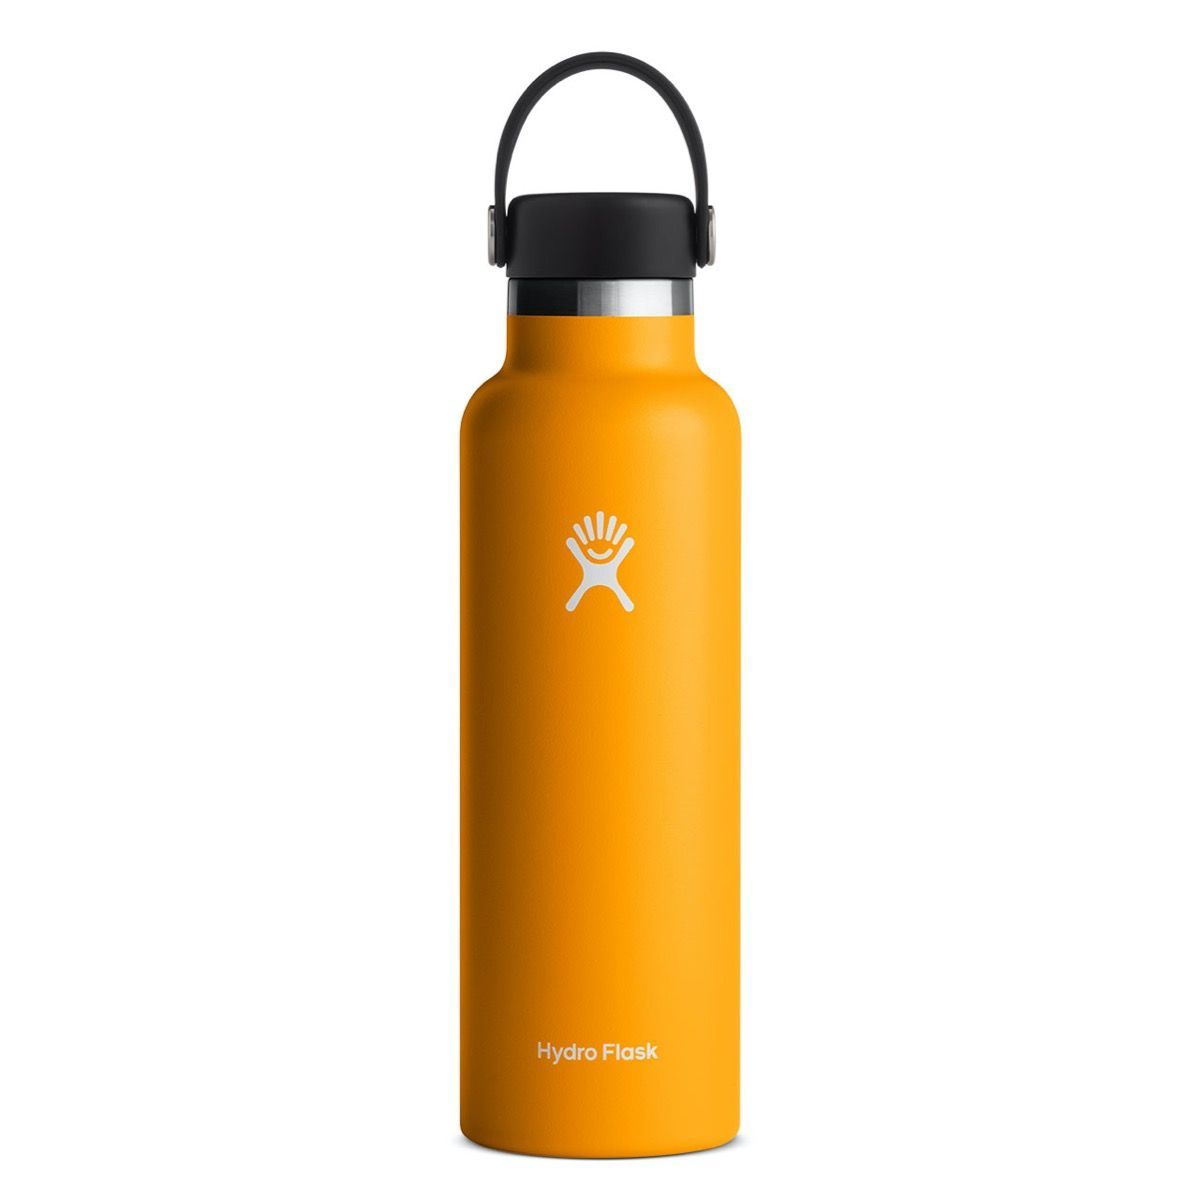 Hydro Flask Standard Mouth bottle 0.71l/24oz - BPA Free Stainless Steel Starfish Cutlery